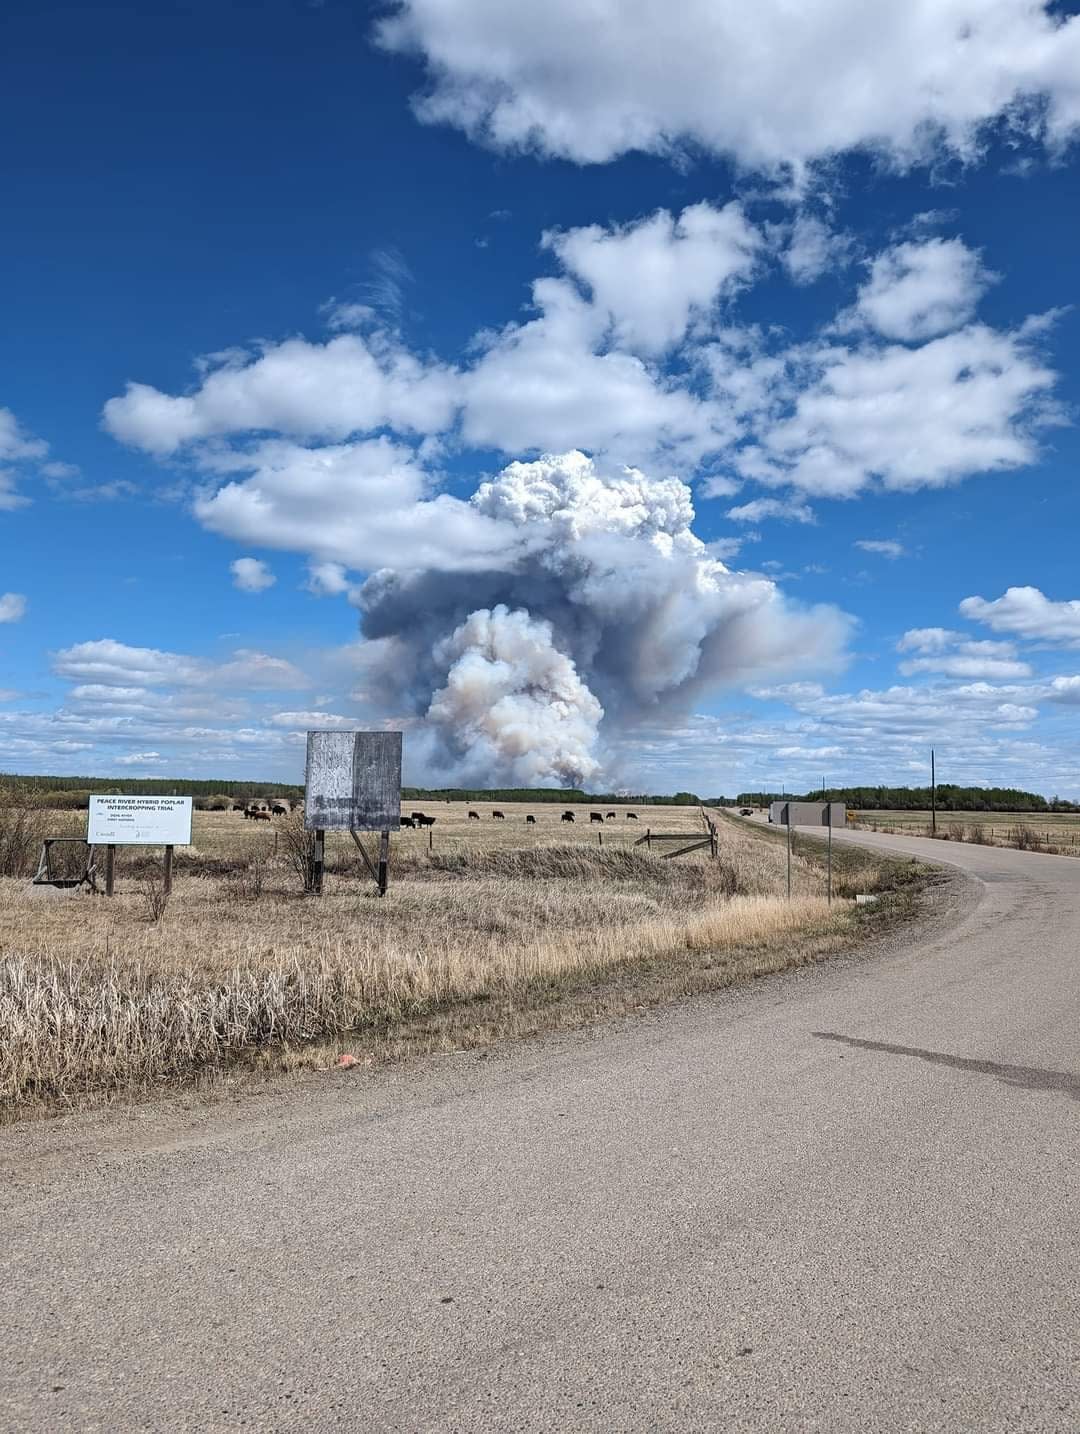 A wildfire near the Doig River First Nation reserve, near Fort St. John, B.C., is pictured on Monday. The fire led to an evacuation order for the entire community. (Submitted by Marlene Benson - image credit)